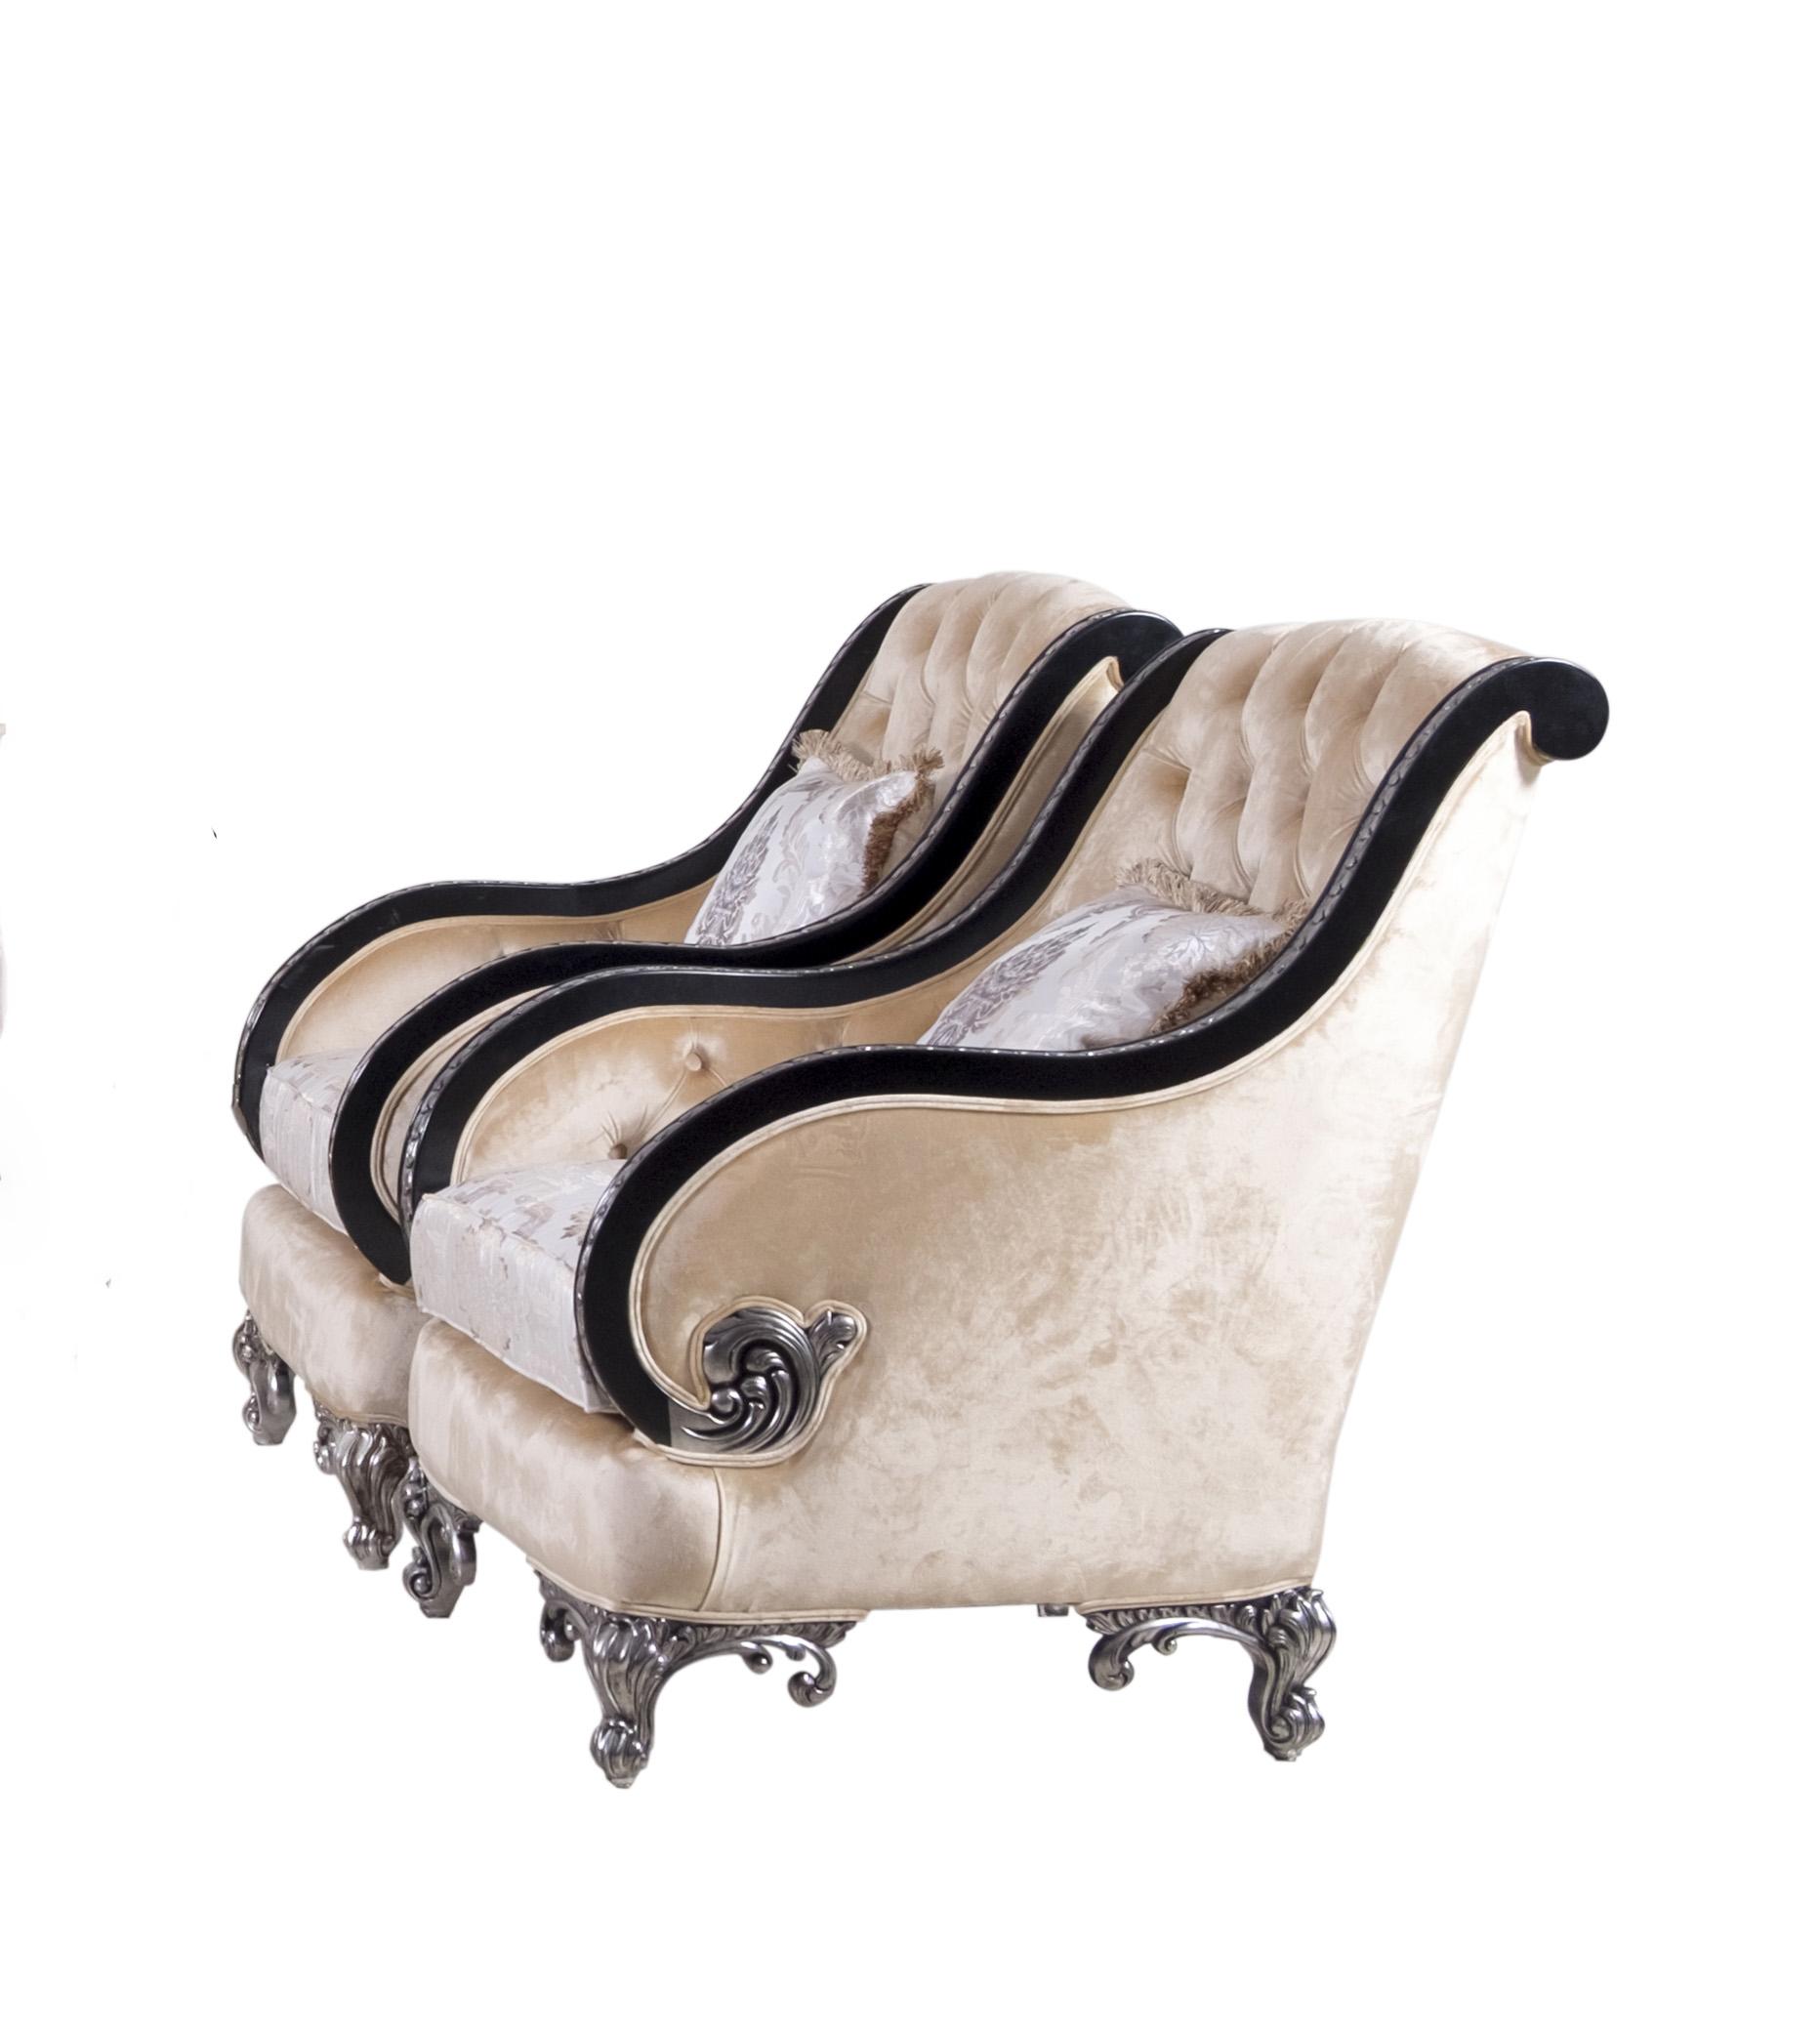 Classic, Traditional Arm Chair Set ROSABELLA 35022-C -Set-2 in Antique, Silver, Black Fabric